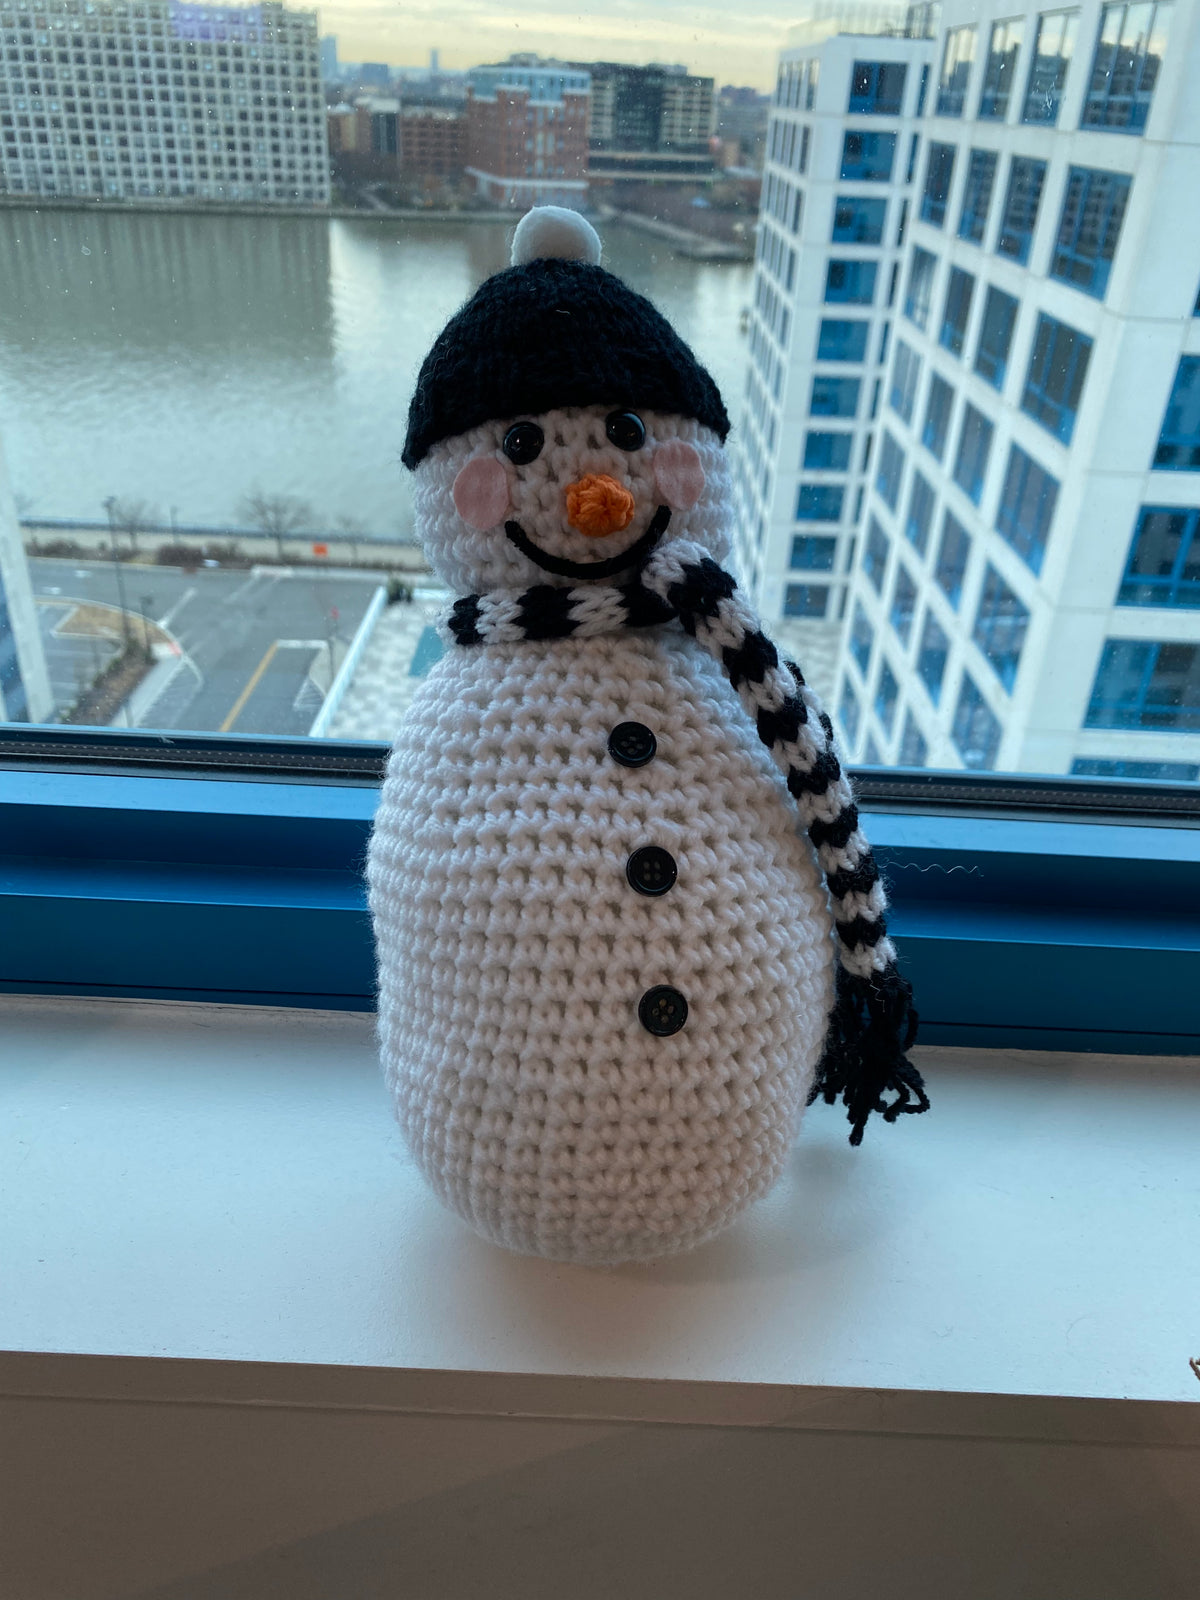 Cute crocheted snowman with black beanie and black and white scarf